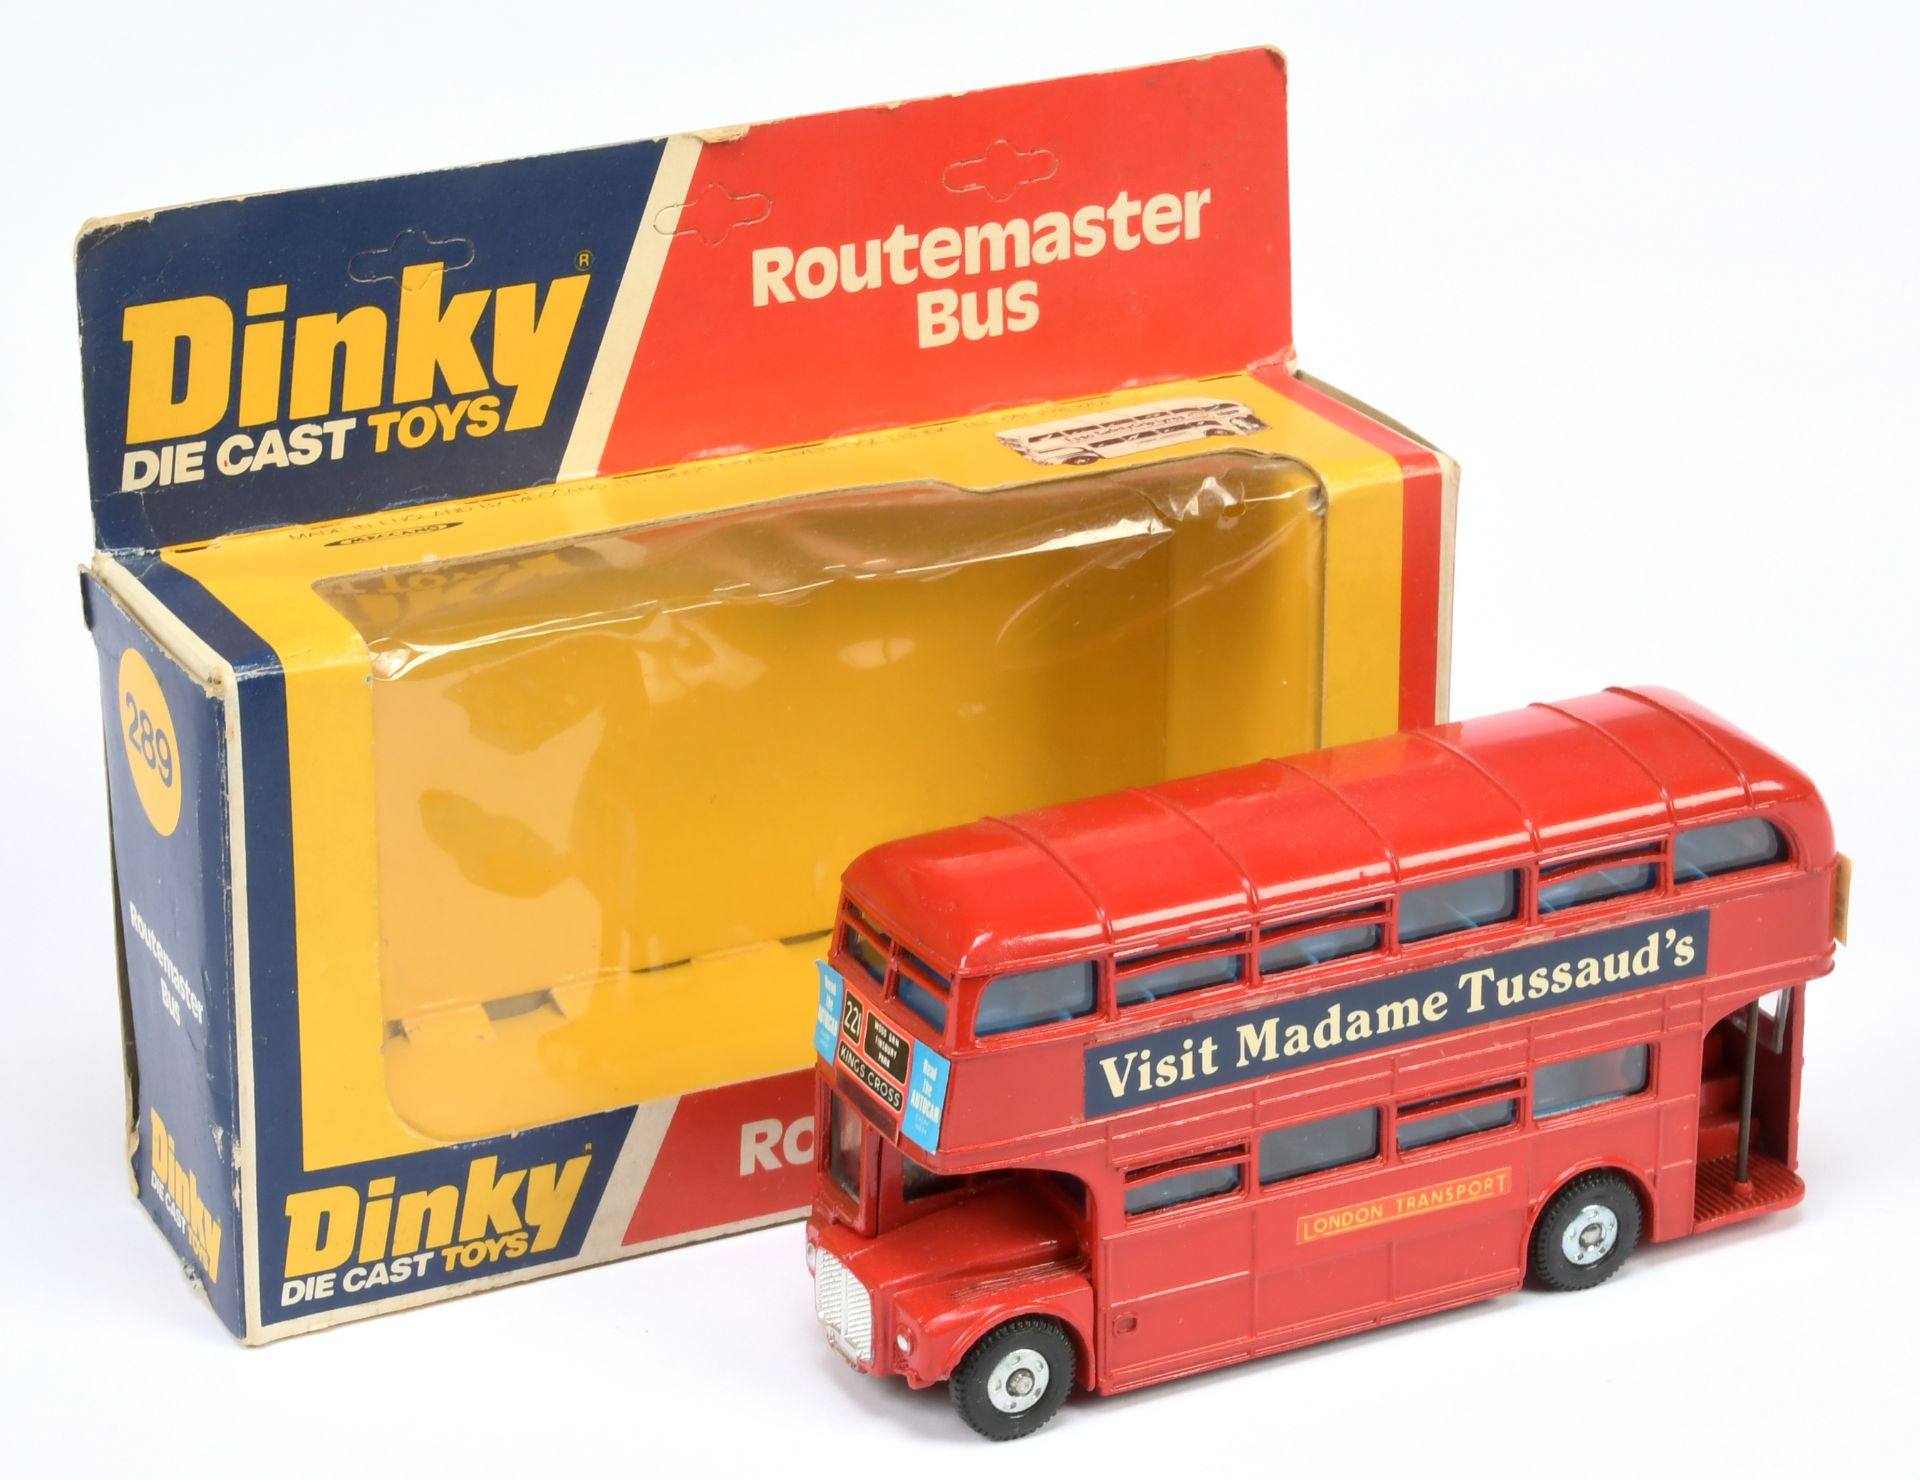 Dinky Toys  289 "London Transport" Routemaster bus "Visit Madame Tussaud's" - red body, blue inte...